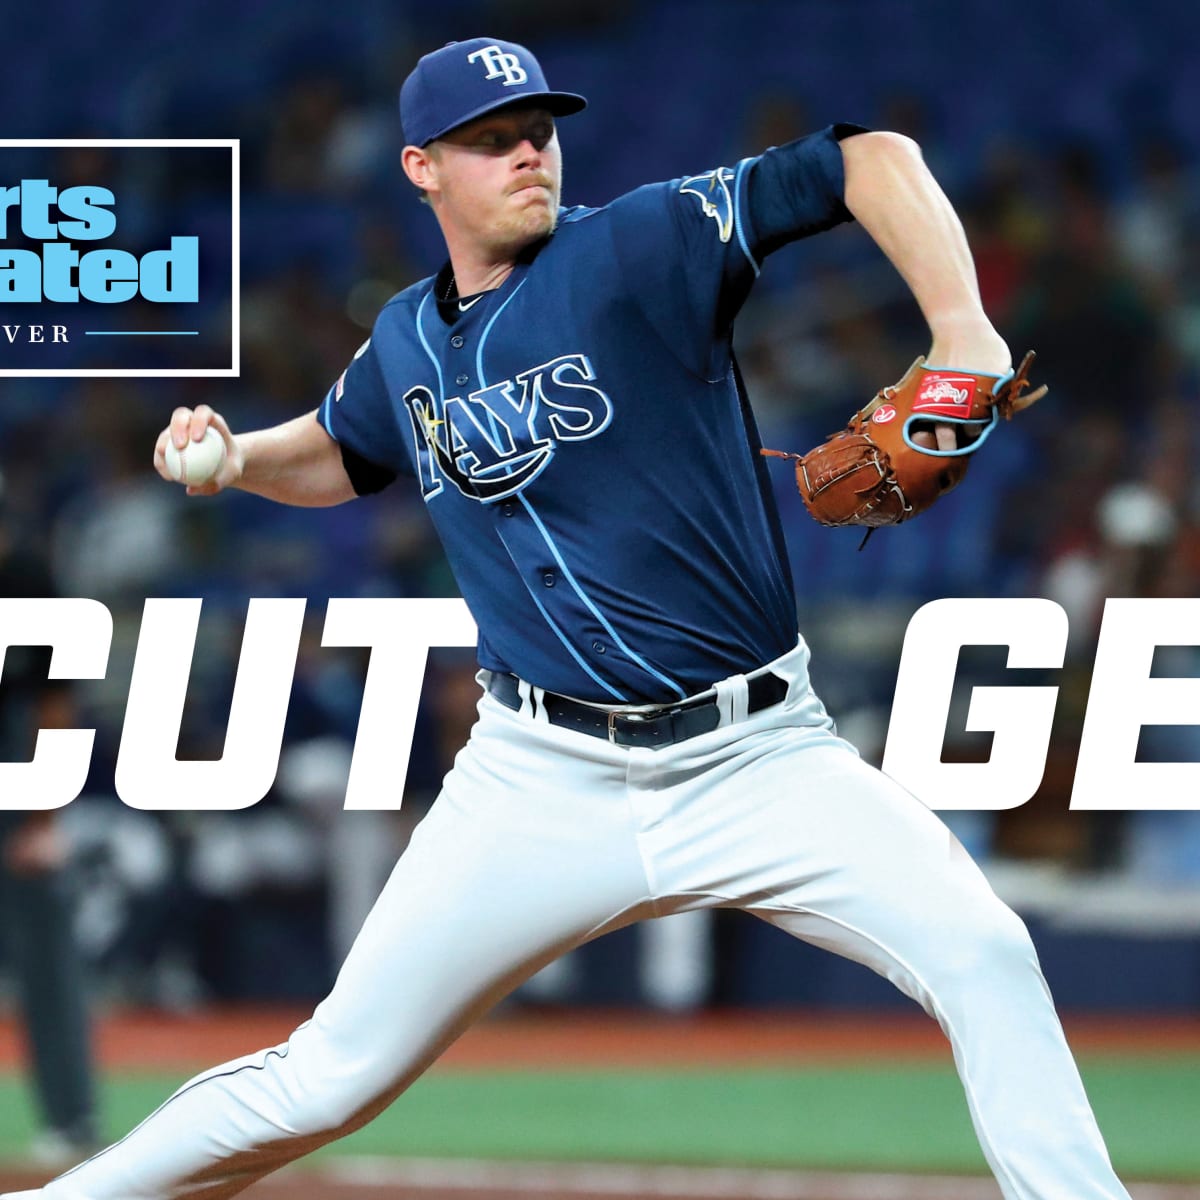 New at Rays camp: Tyler Glasnow has a slider